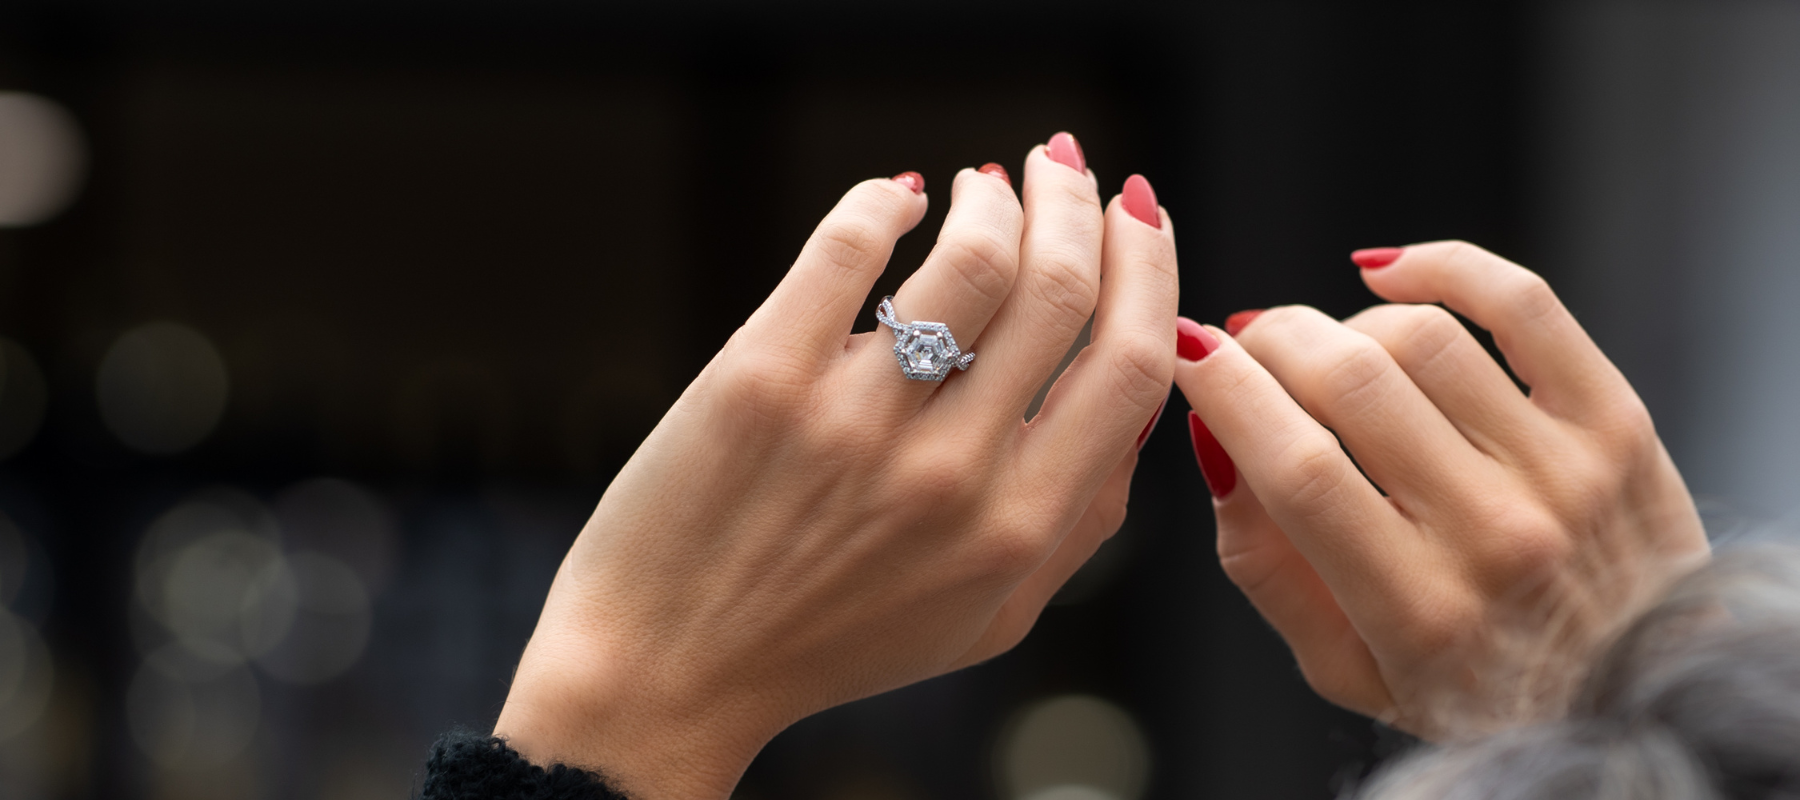 A beautiful diamond engagement ring on the left hand of a women with bright red nails